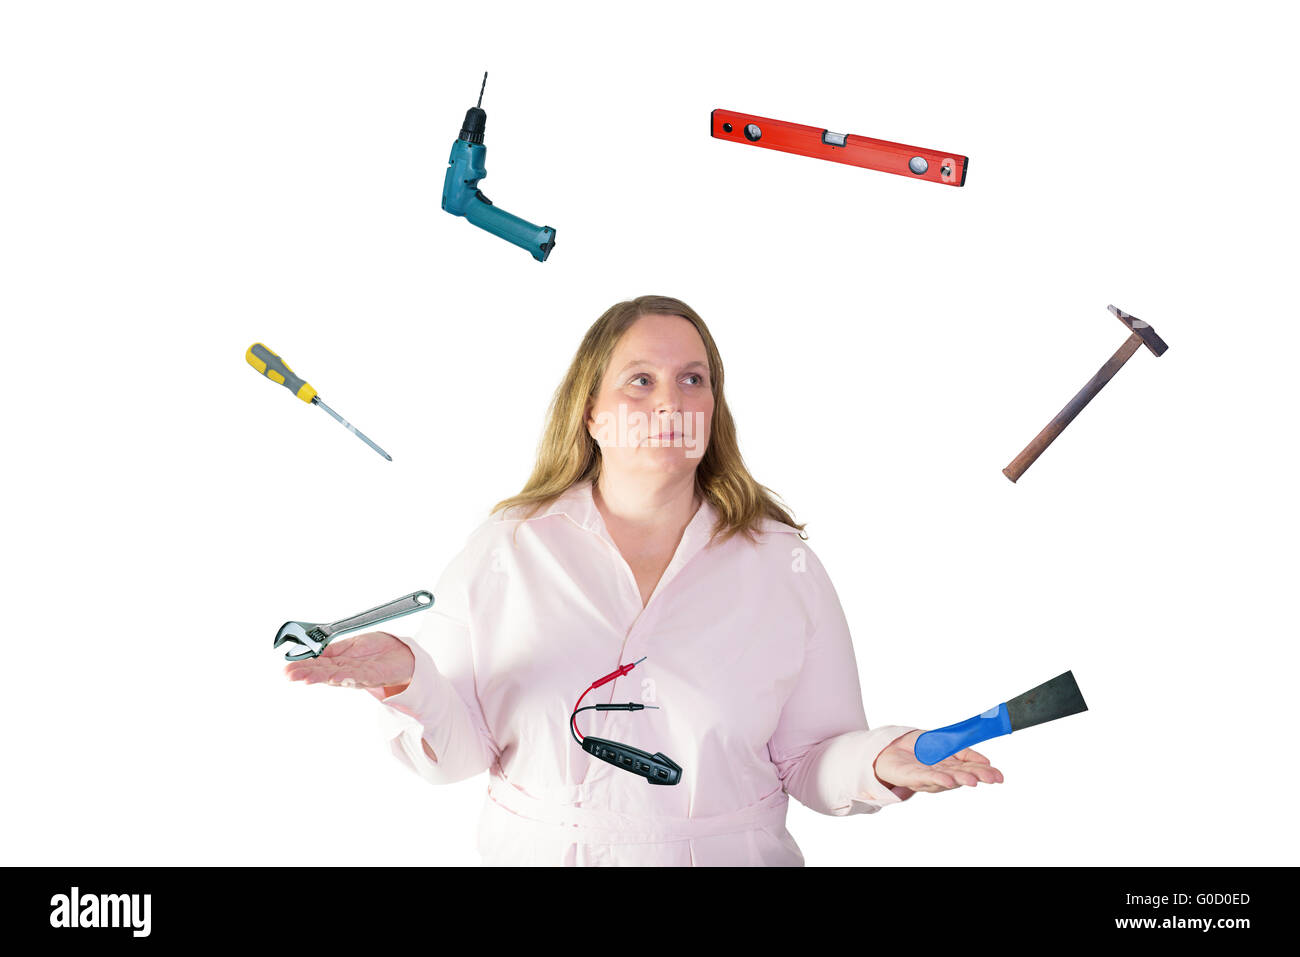 Woman juggles with tool Stock Photo